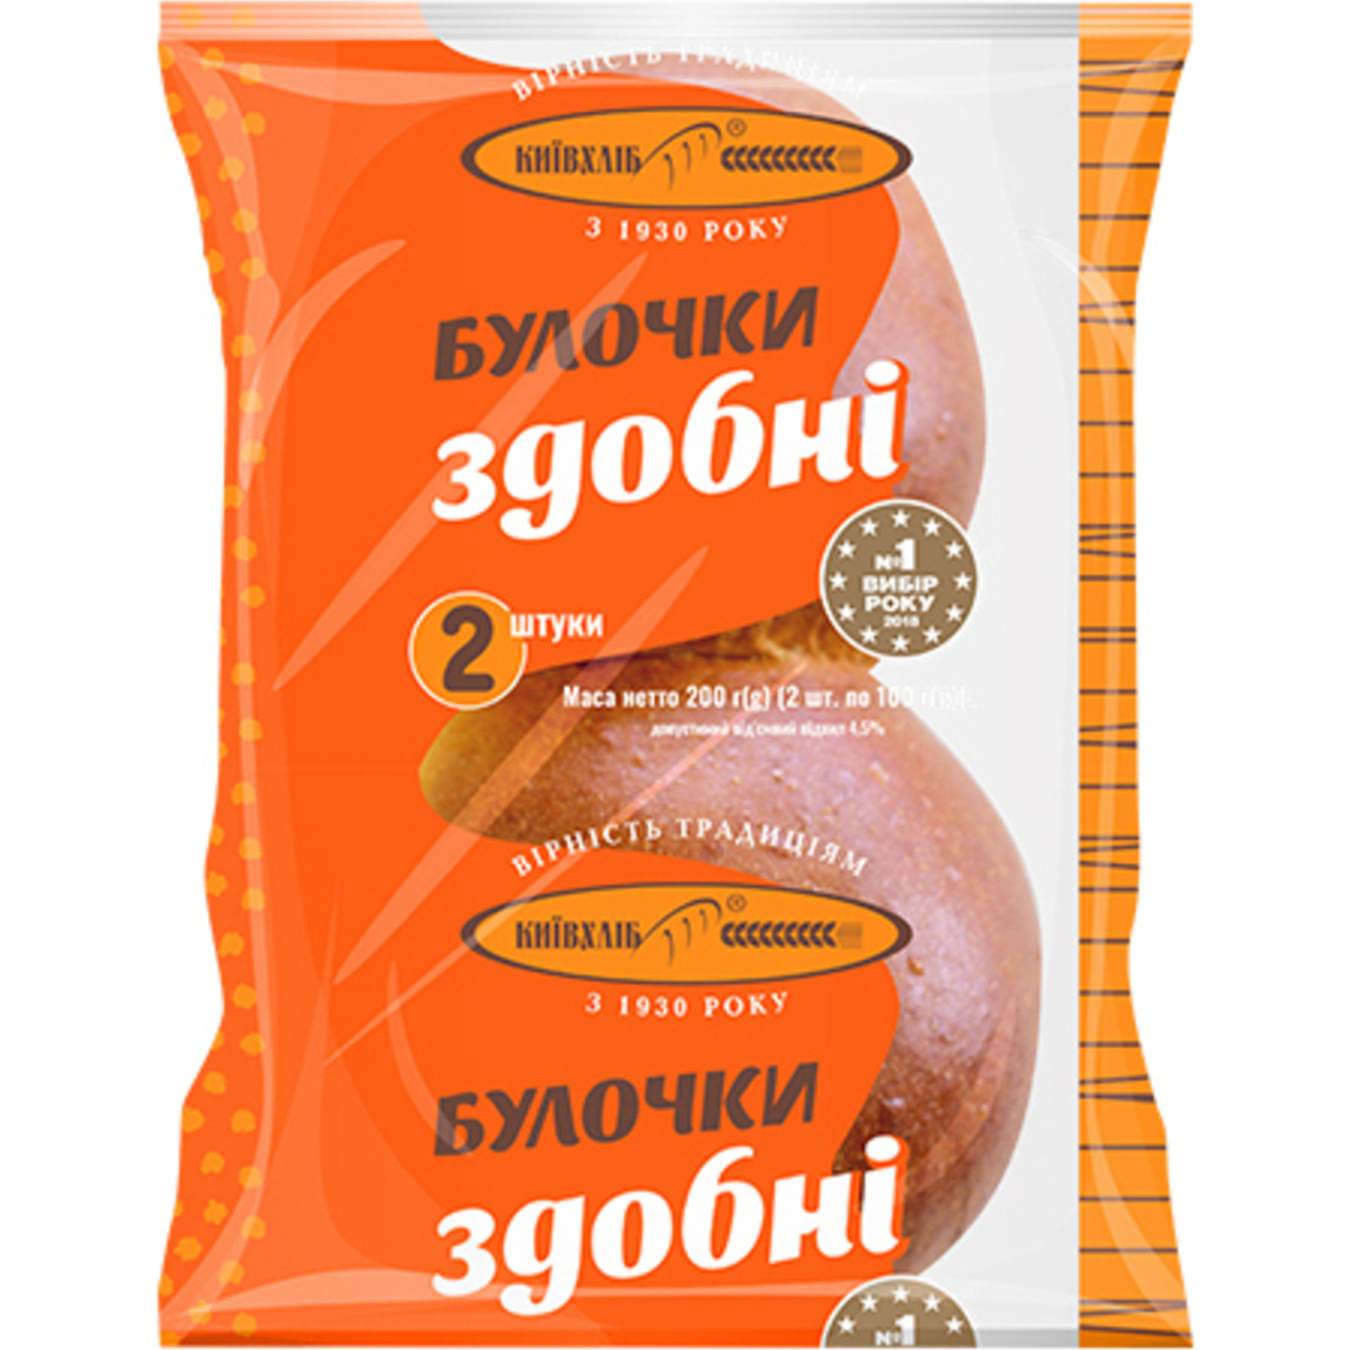 Kyiv bread buns with butter 2pcs/pack